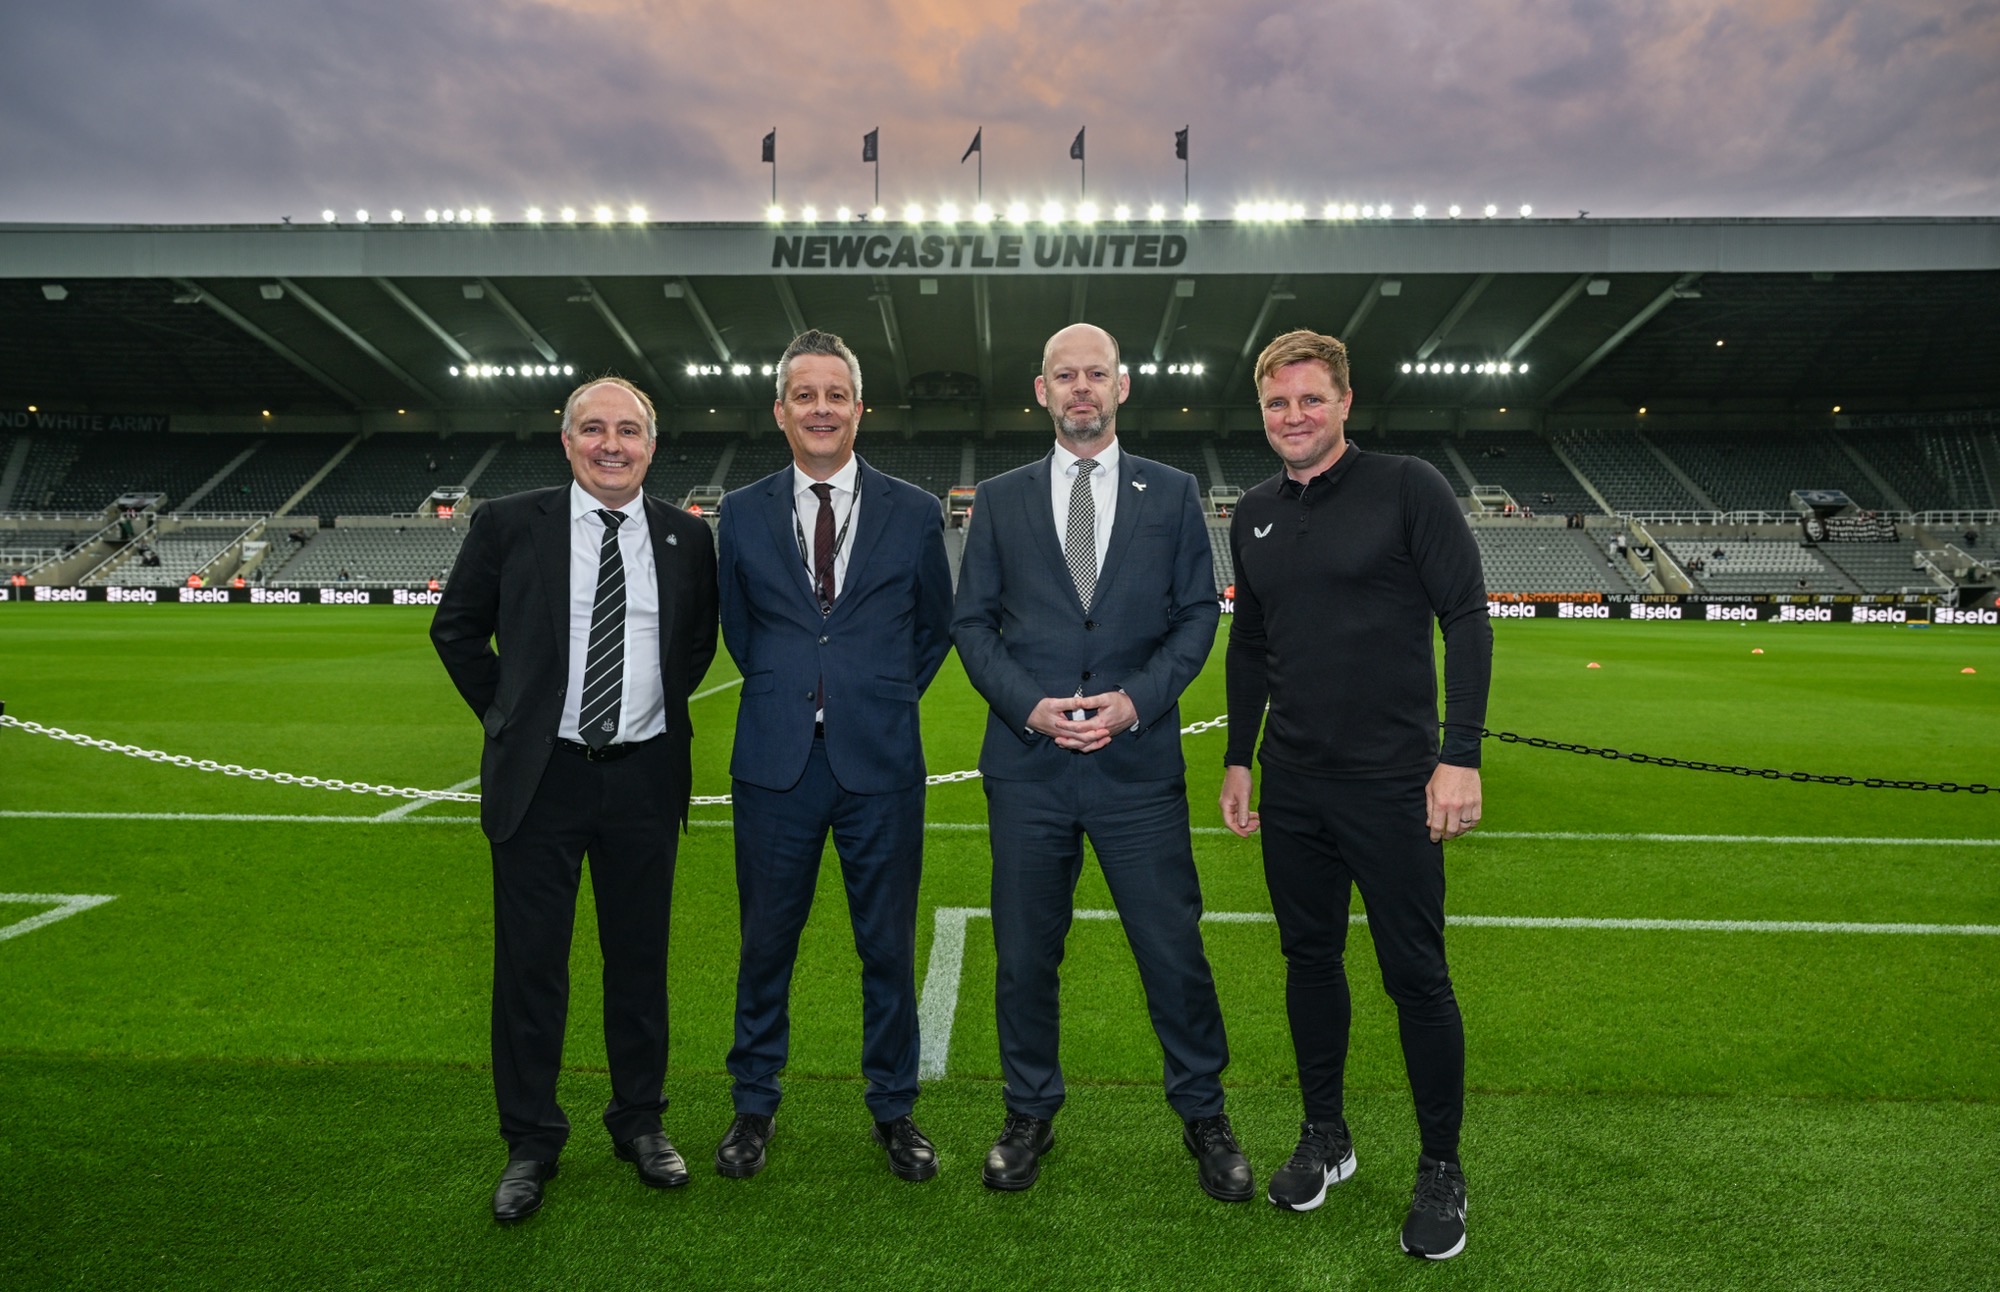 Four city leaders stood on pitch at St James' Park in suits and Eddie Howe in black NUFC training kit.